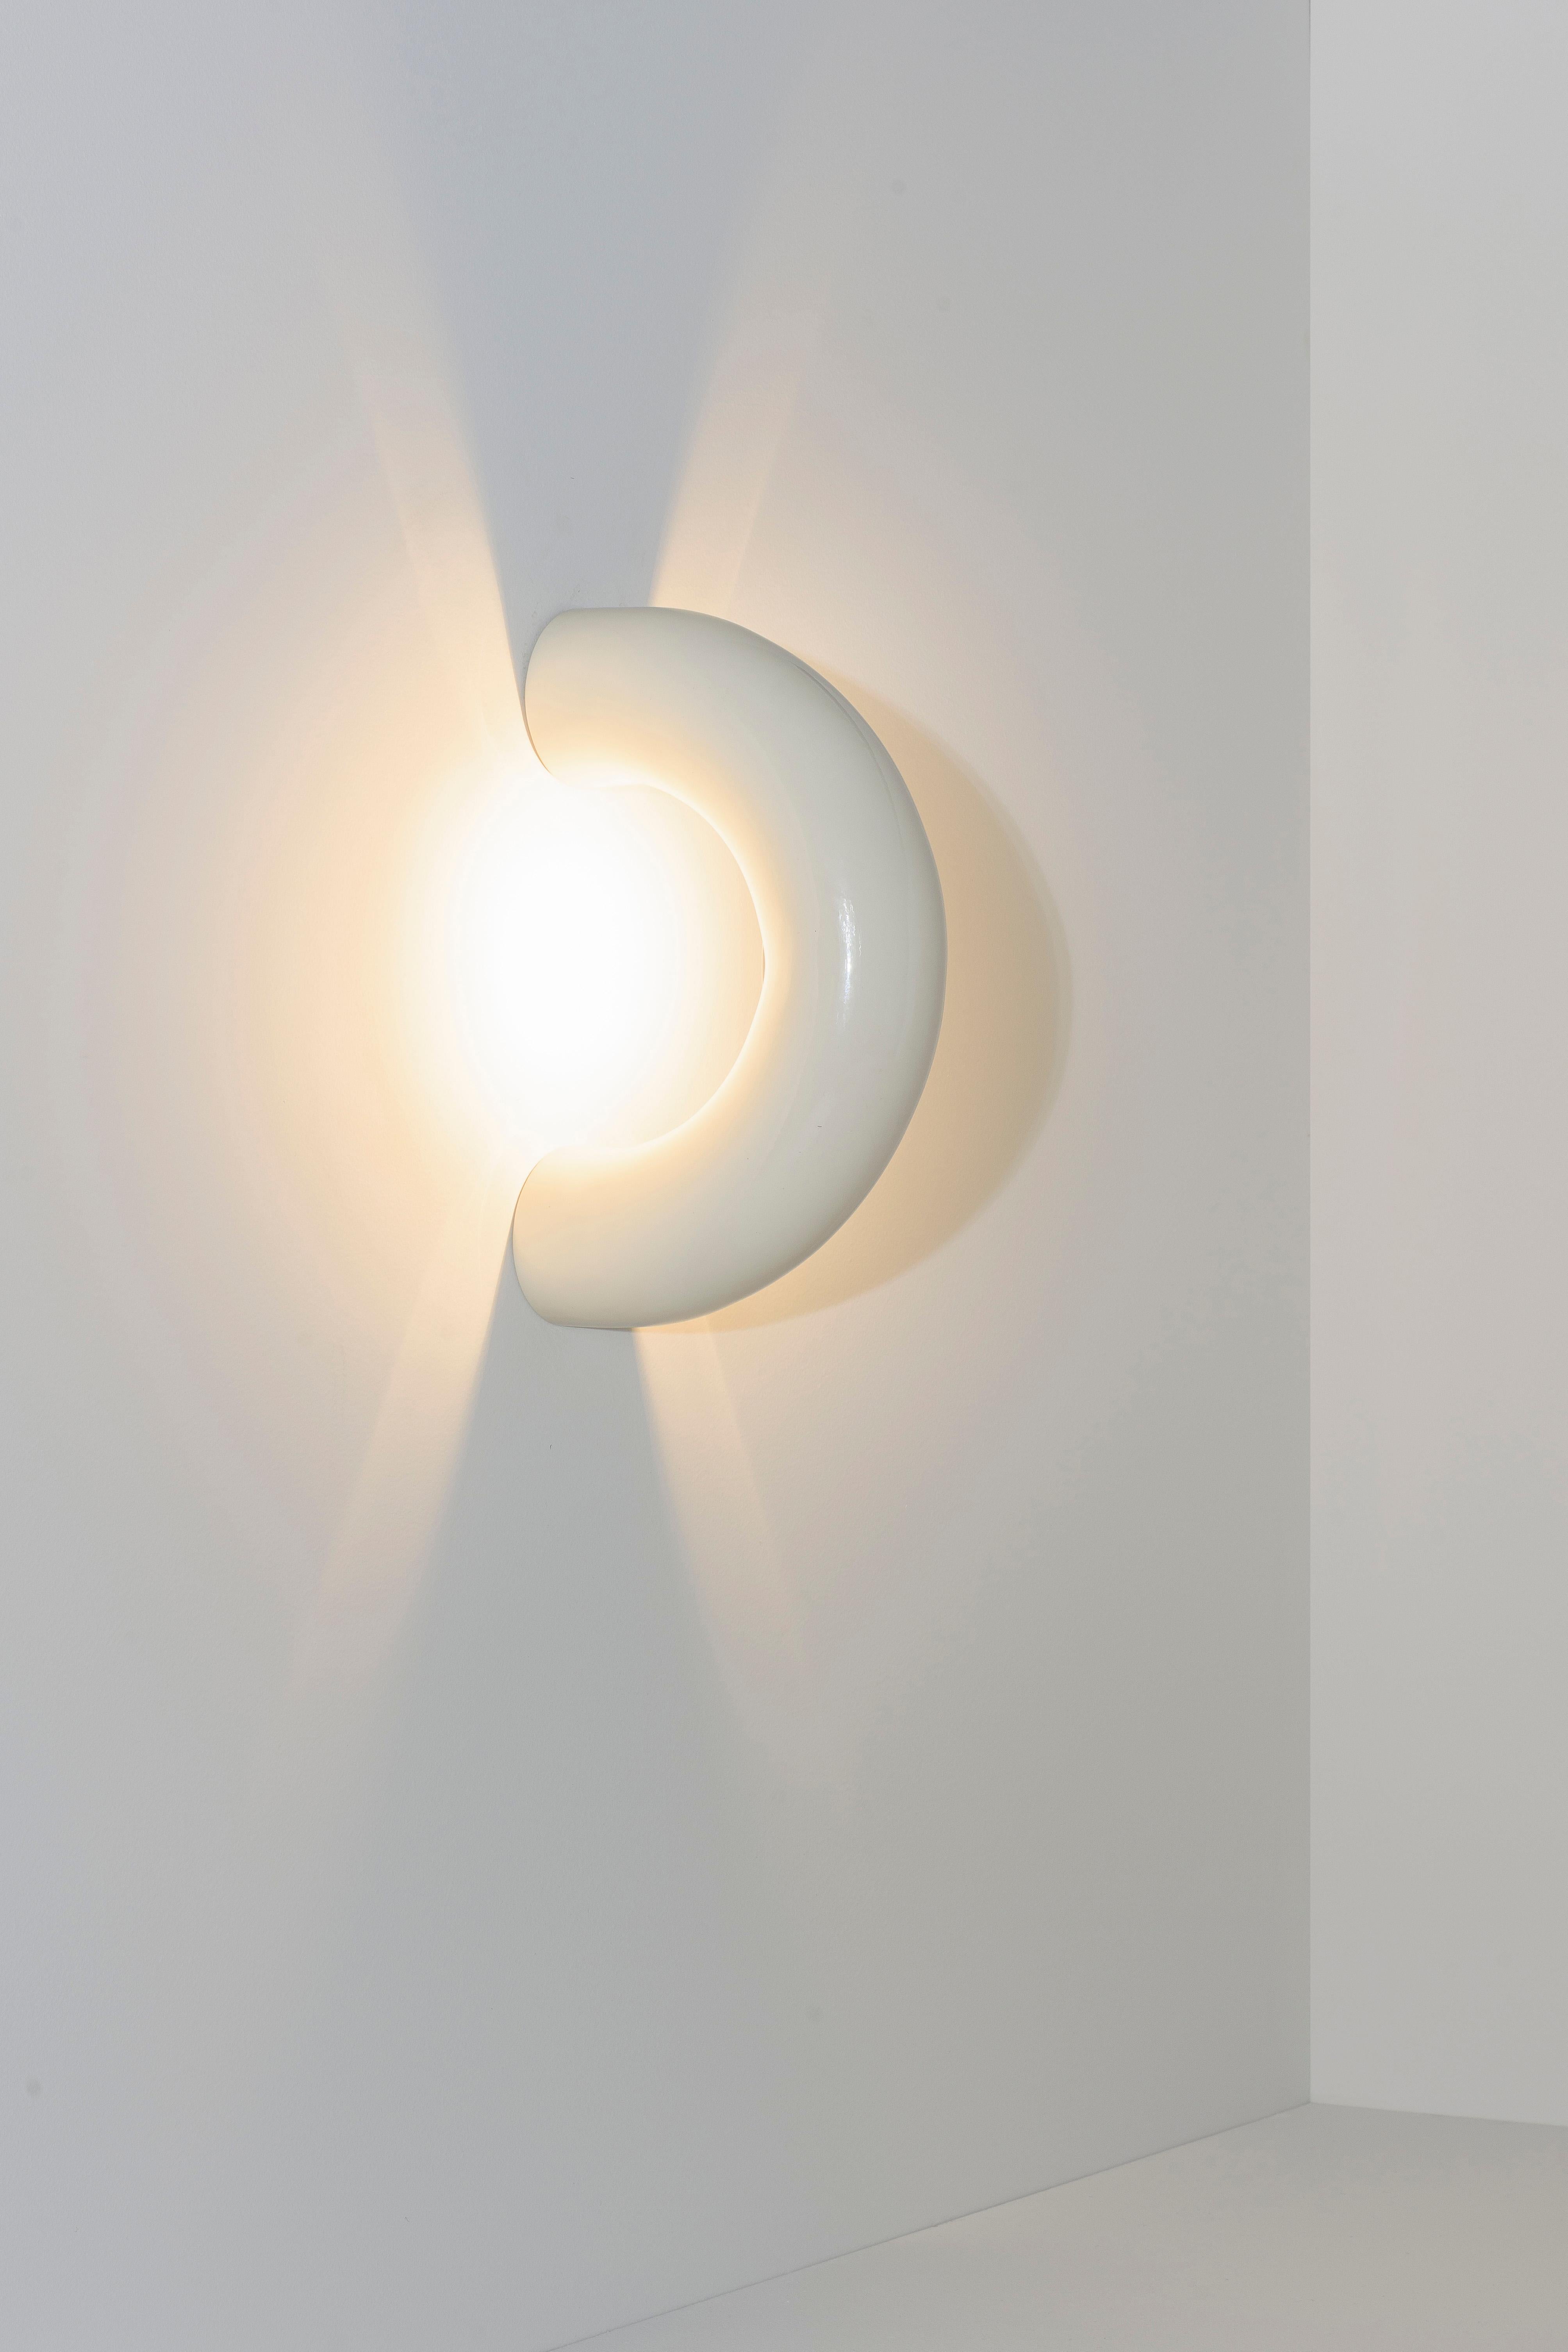 The Arco lamps are made from a prolonged section of circle that stand out by the discontinuity of its shape. The collection consists of lamps that seem to penetrate the surfaces they touch, illuminating them delicately. The light focus frames the